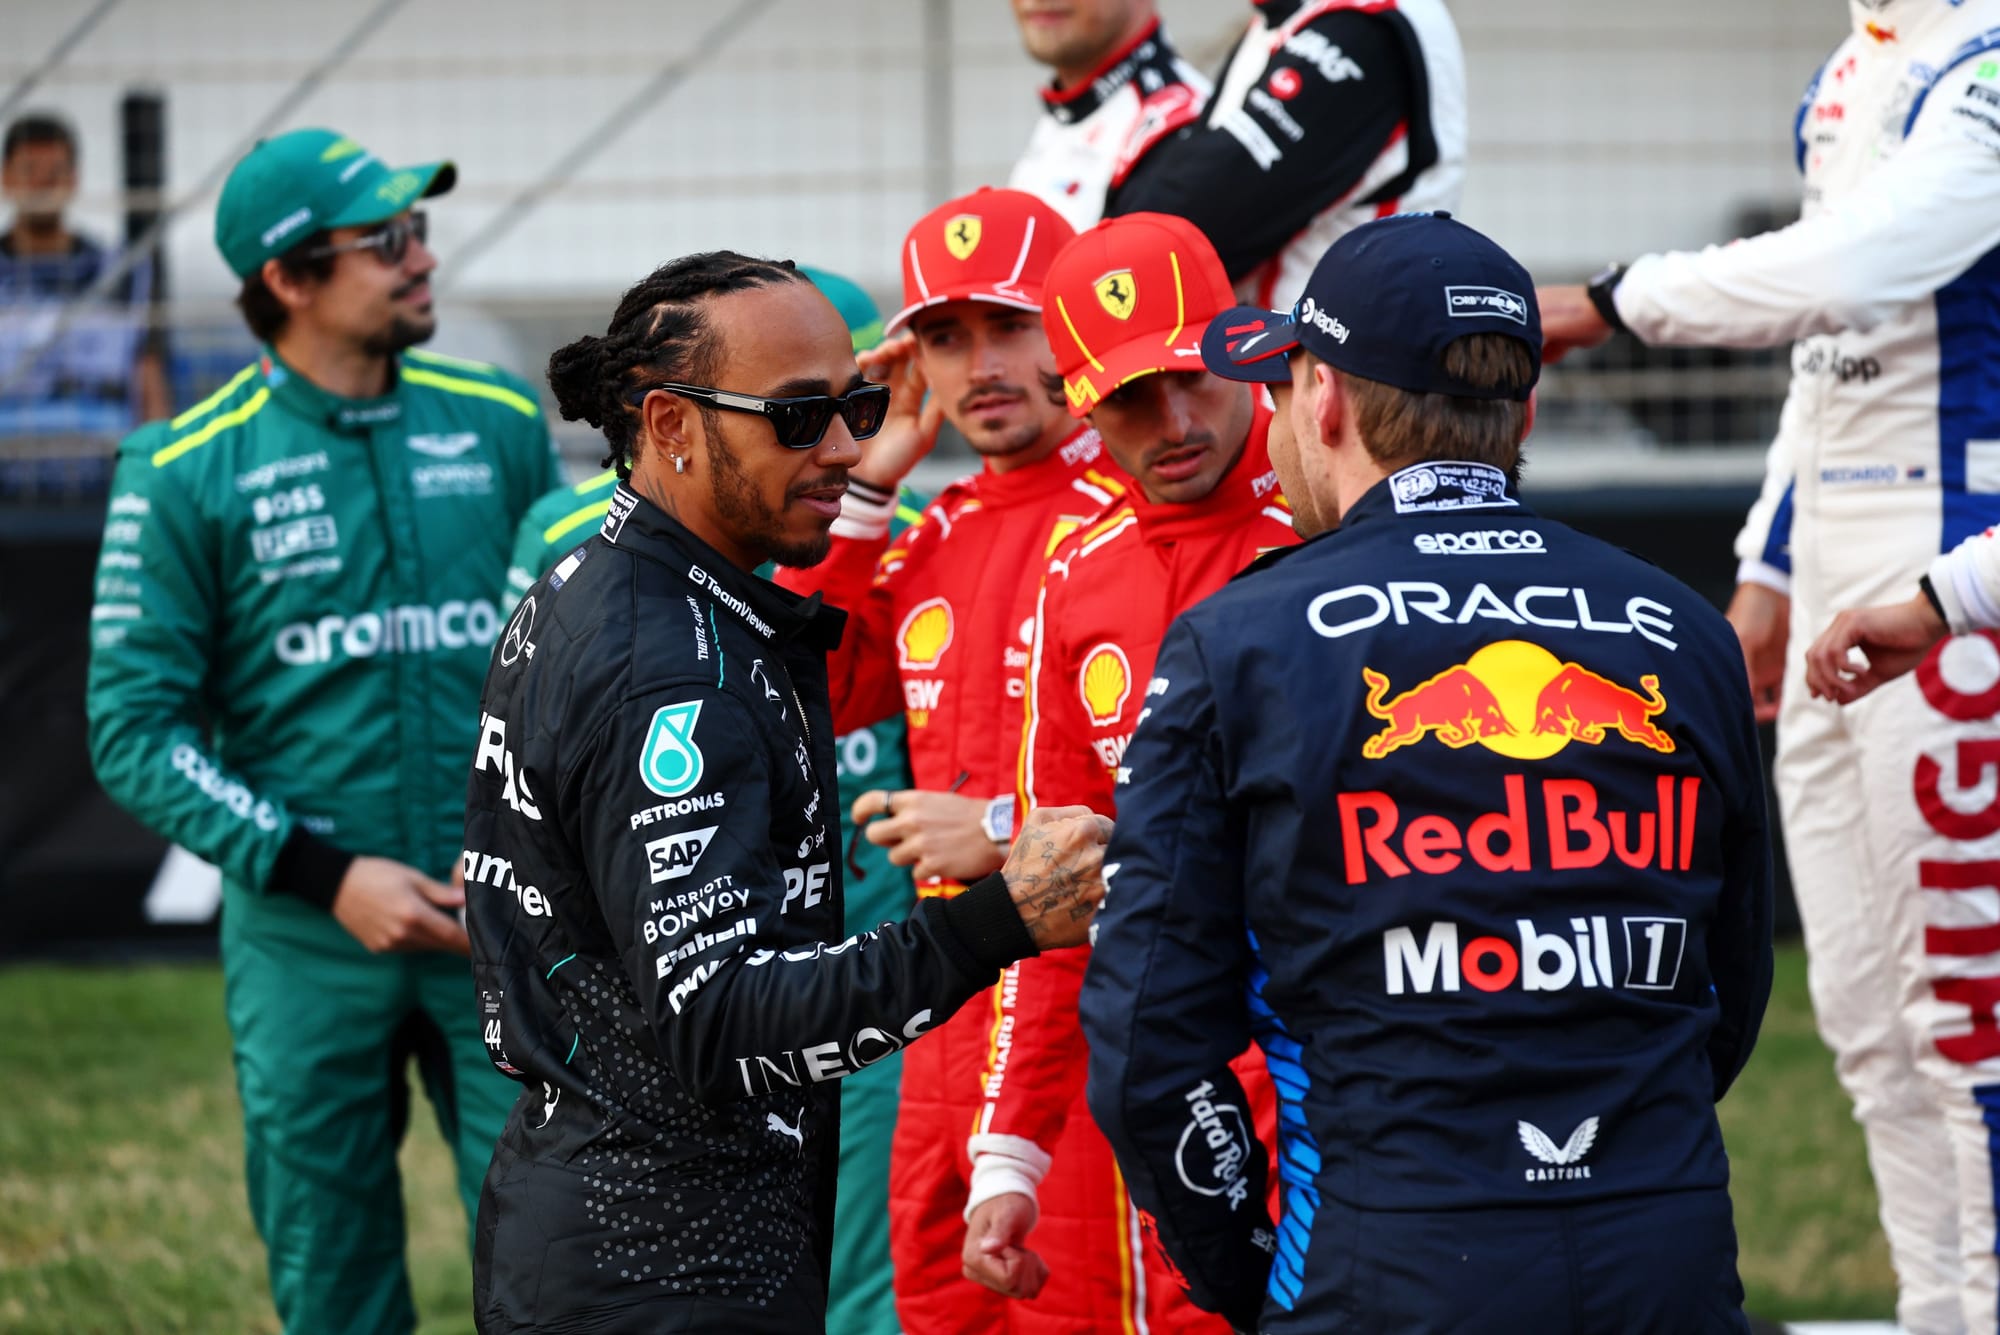 Lewis Hamilton, Mercedes, and Max Verstappen, Red Bull, F1